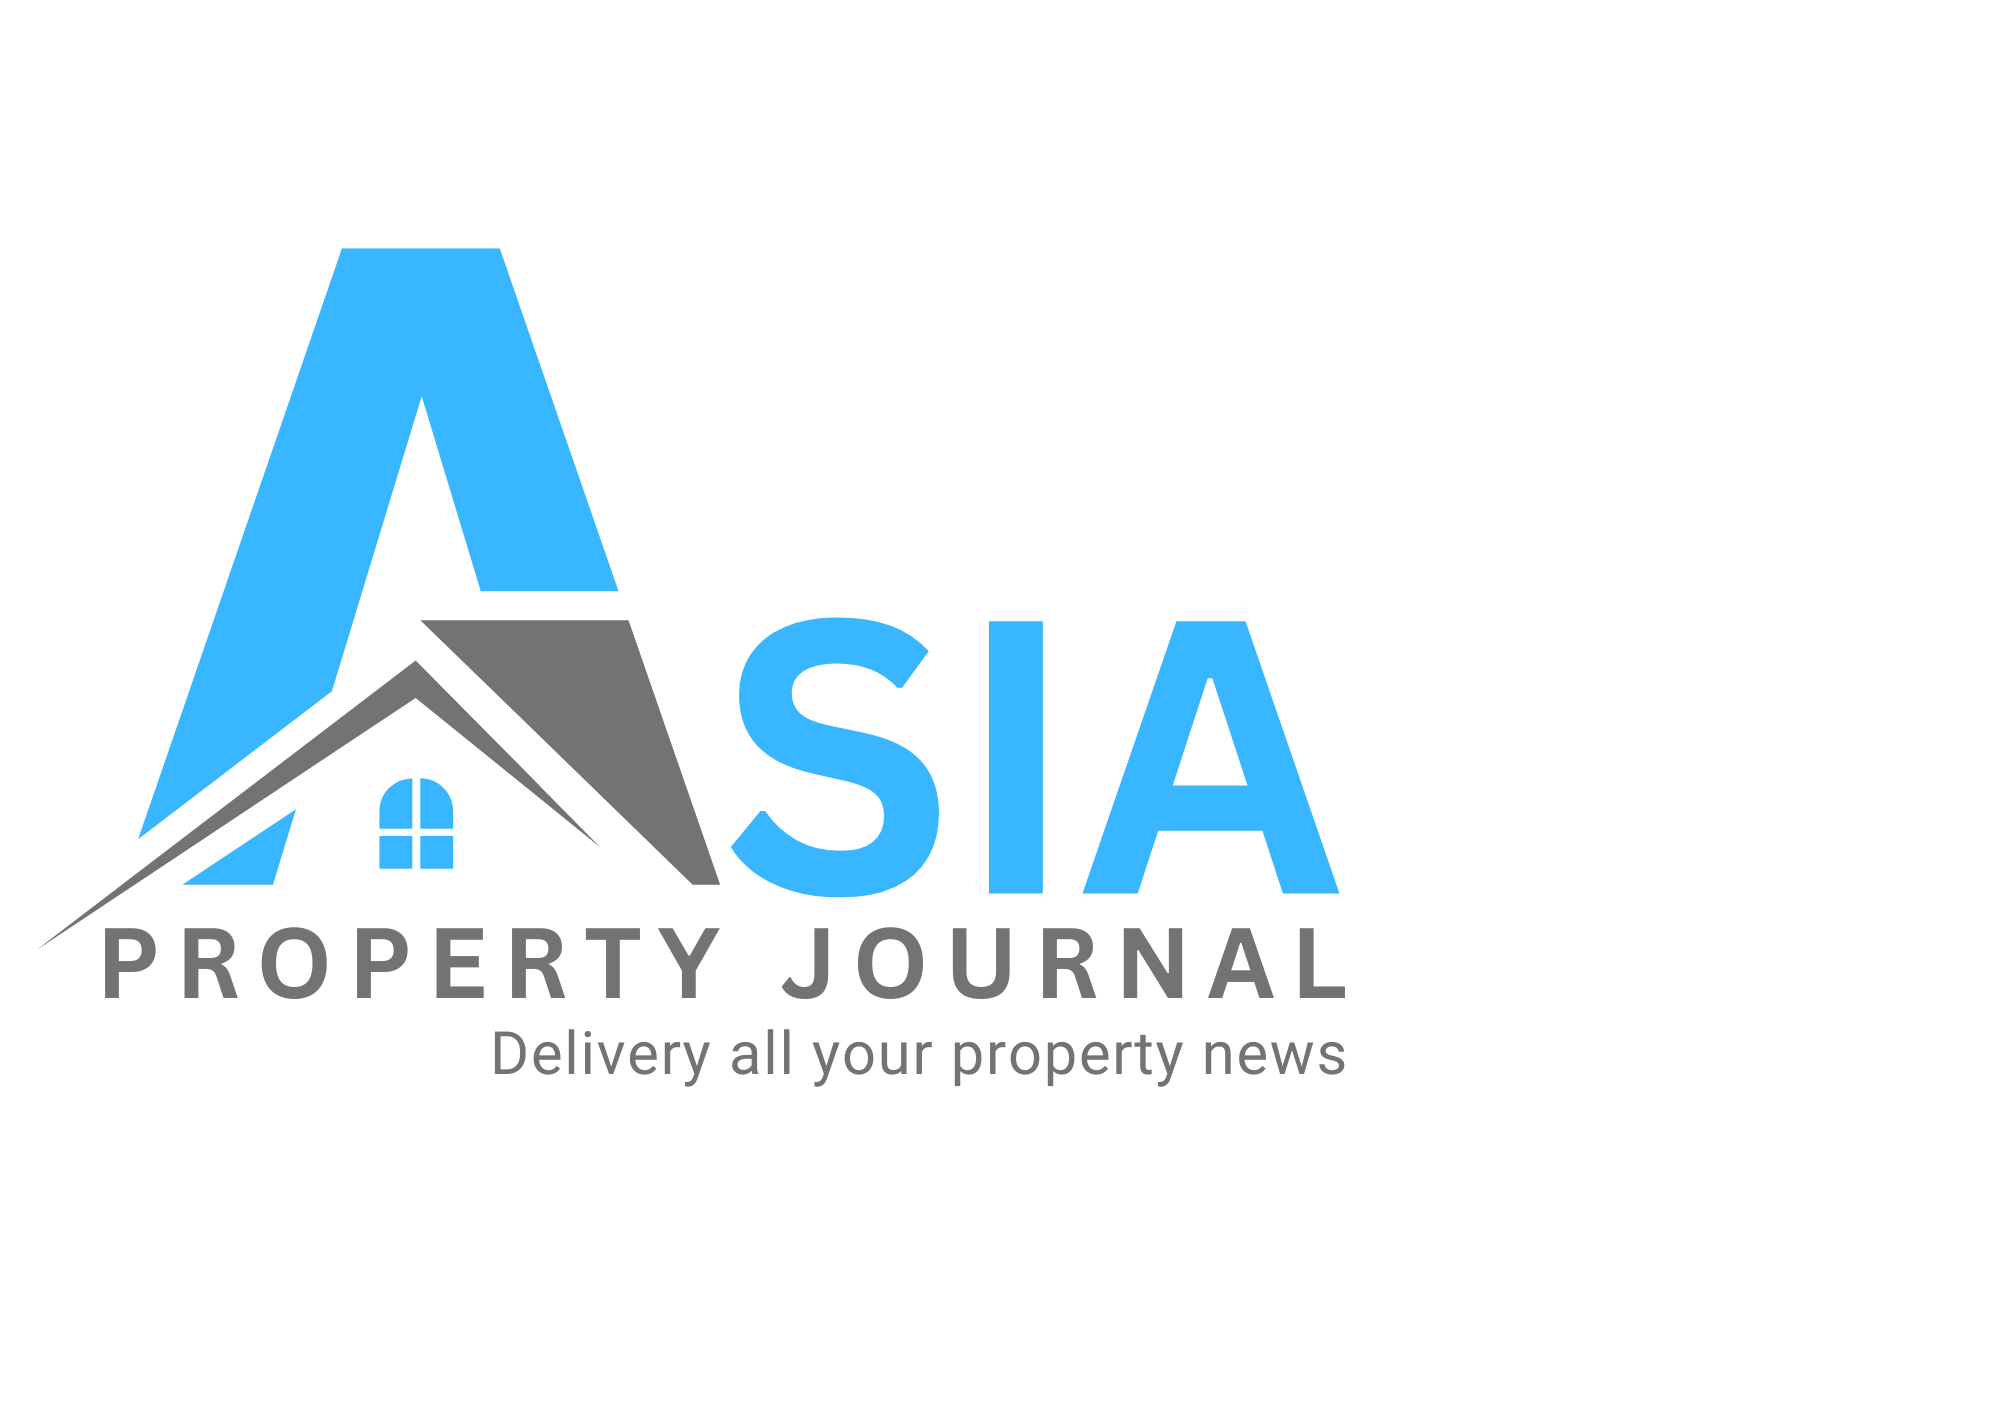 Asia Property Journal